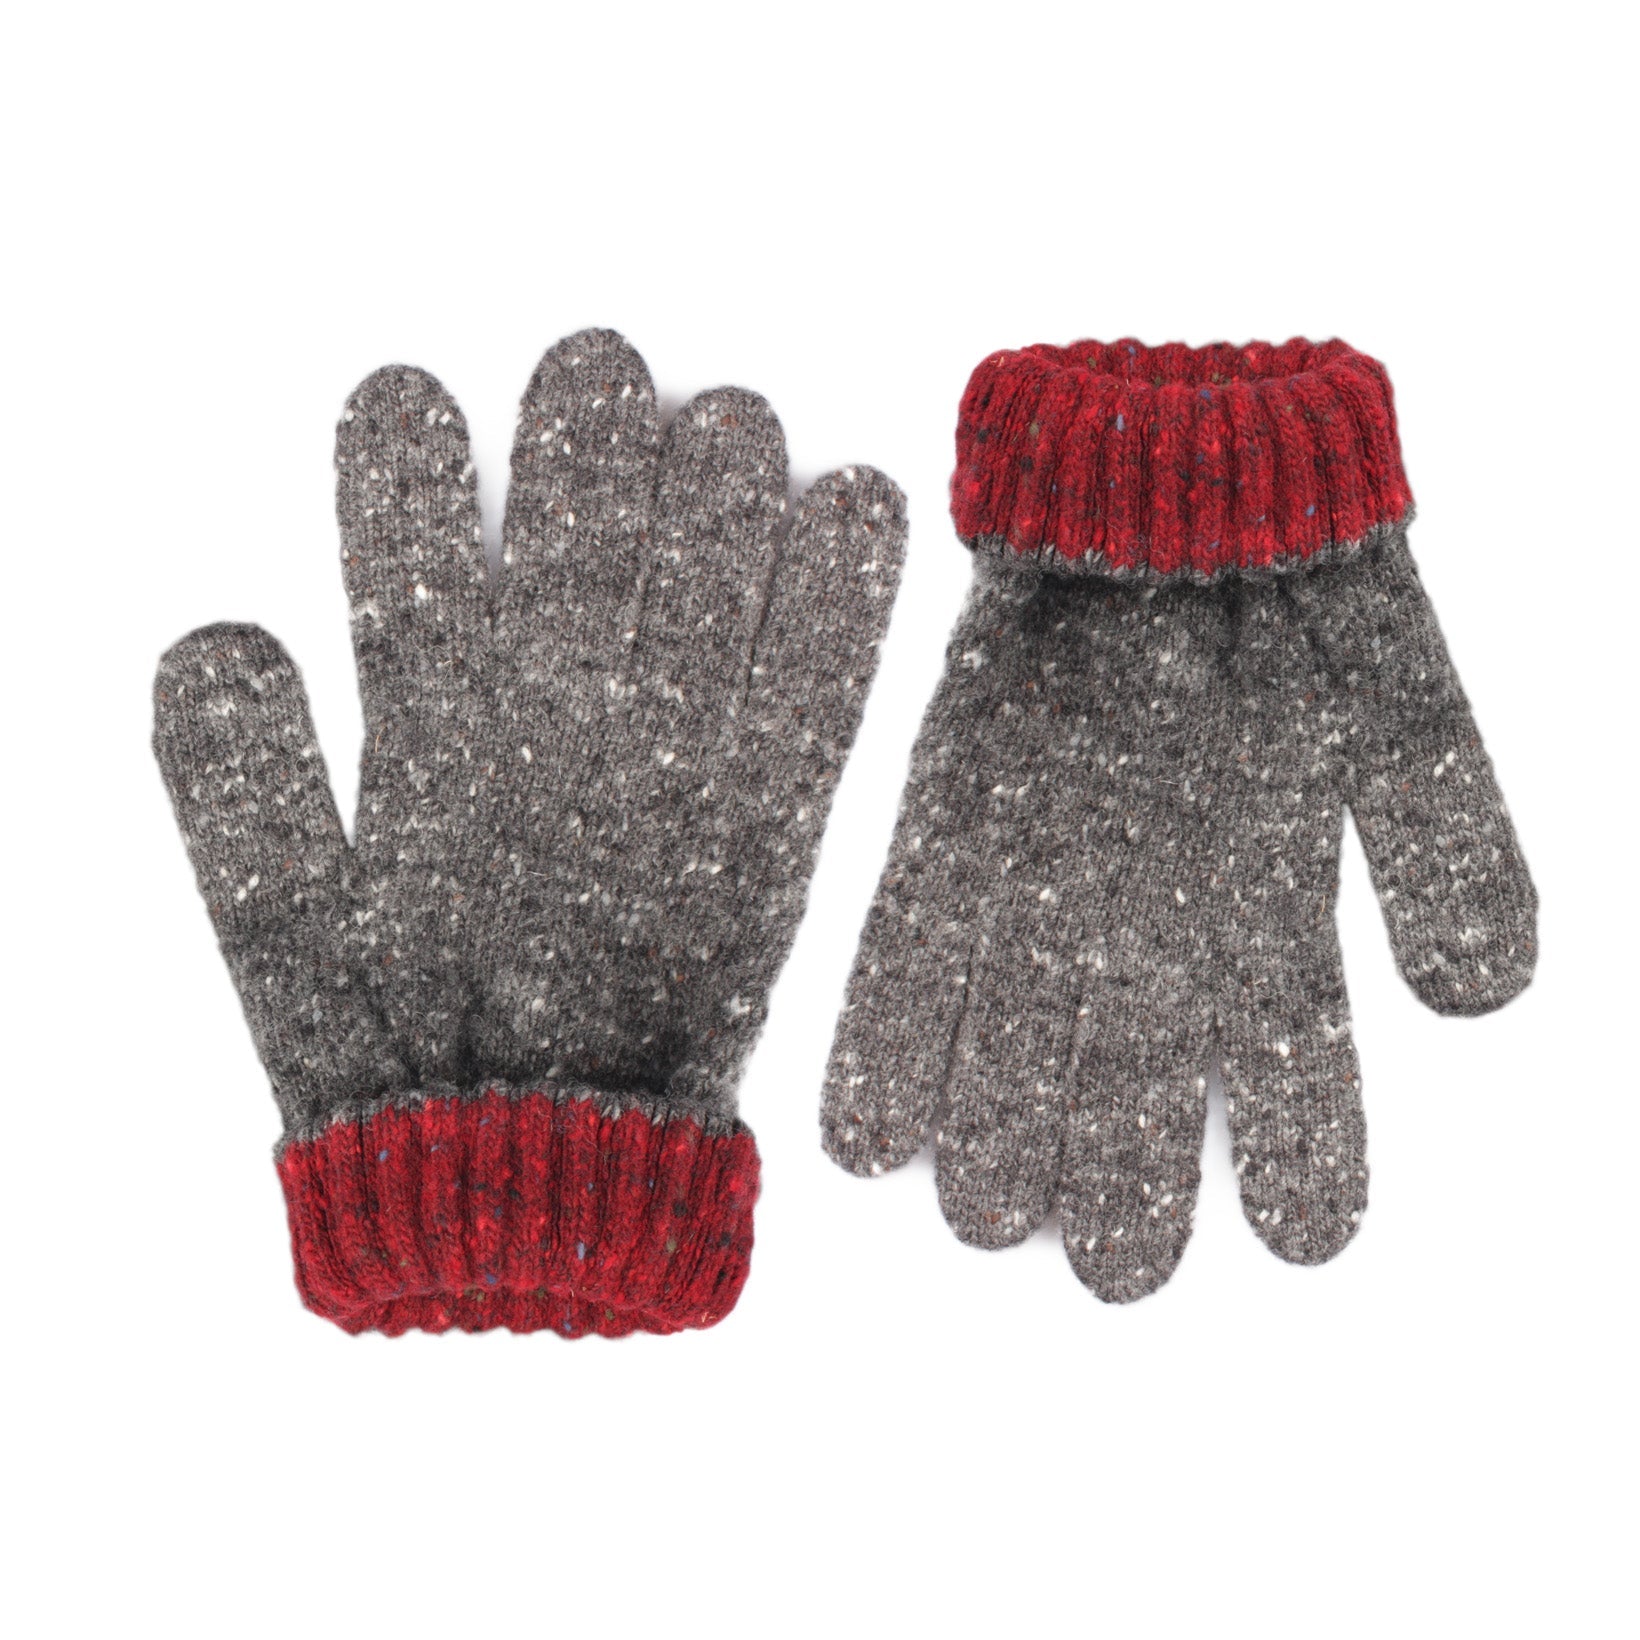 Merino Wool Gloves - Donegal Knitted-Drake's-Conrad Hasselbach Shoes & Garment